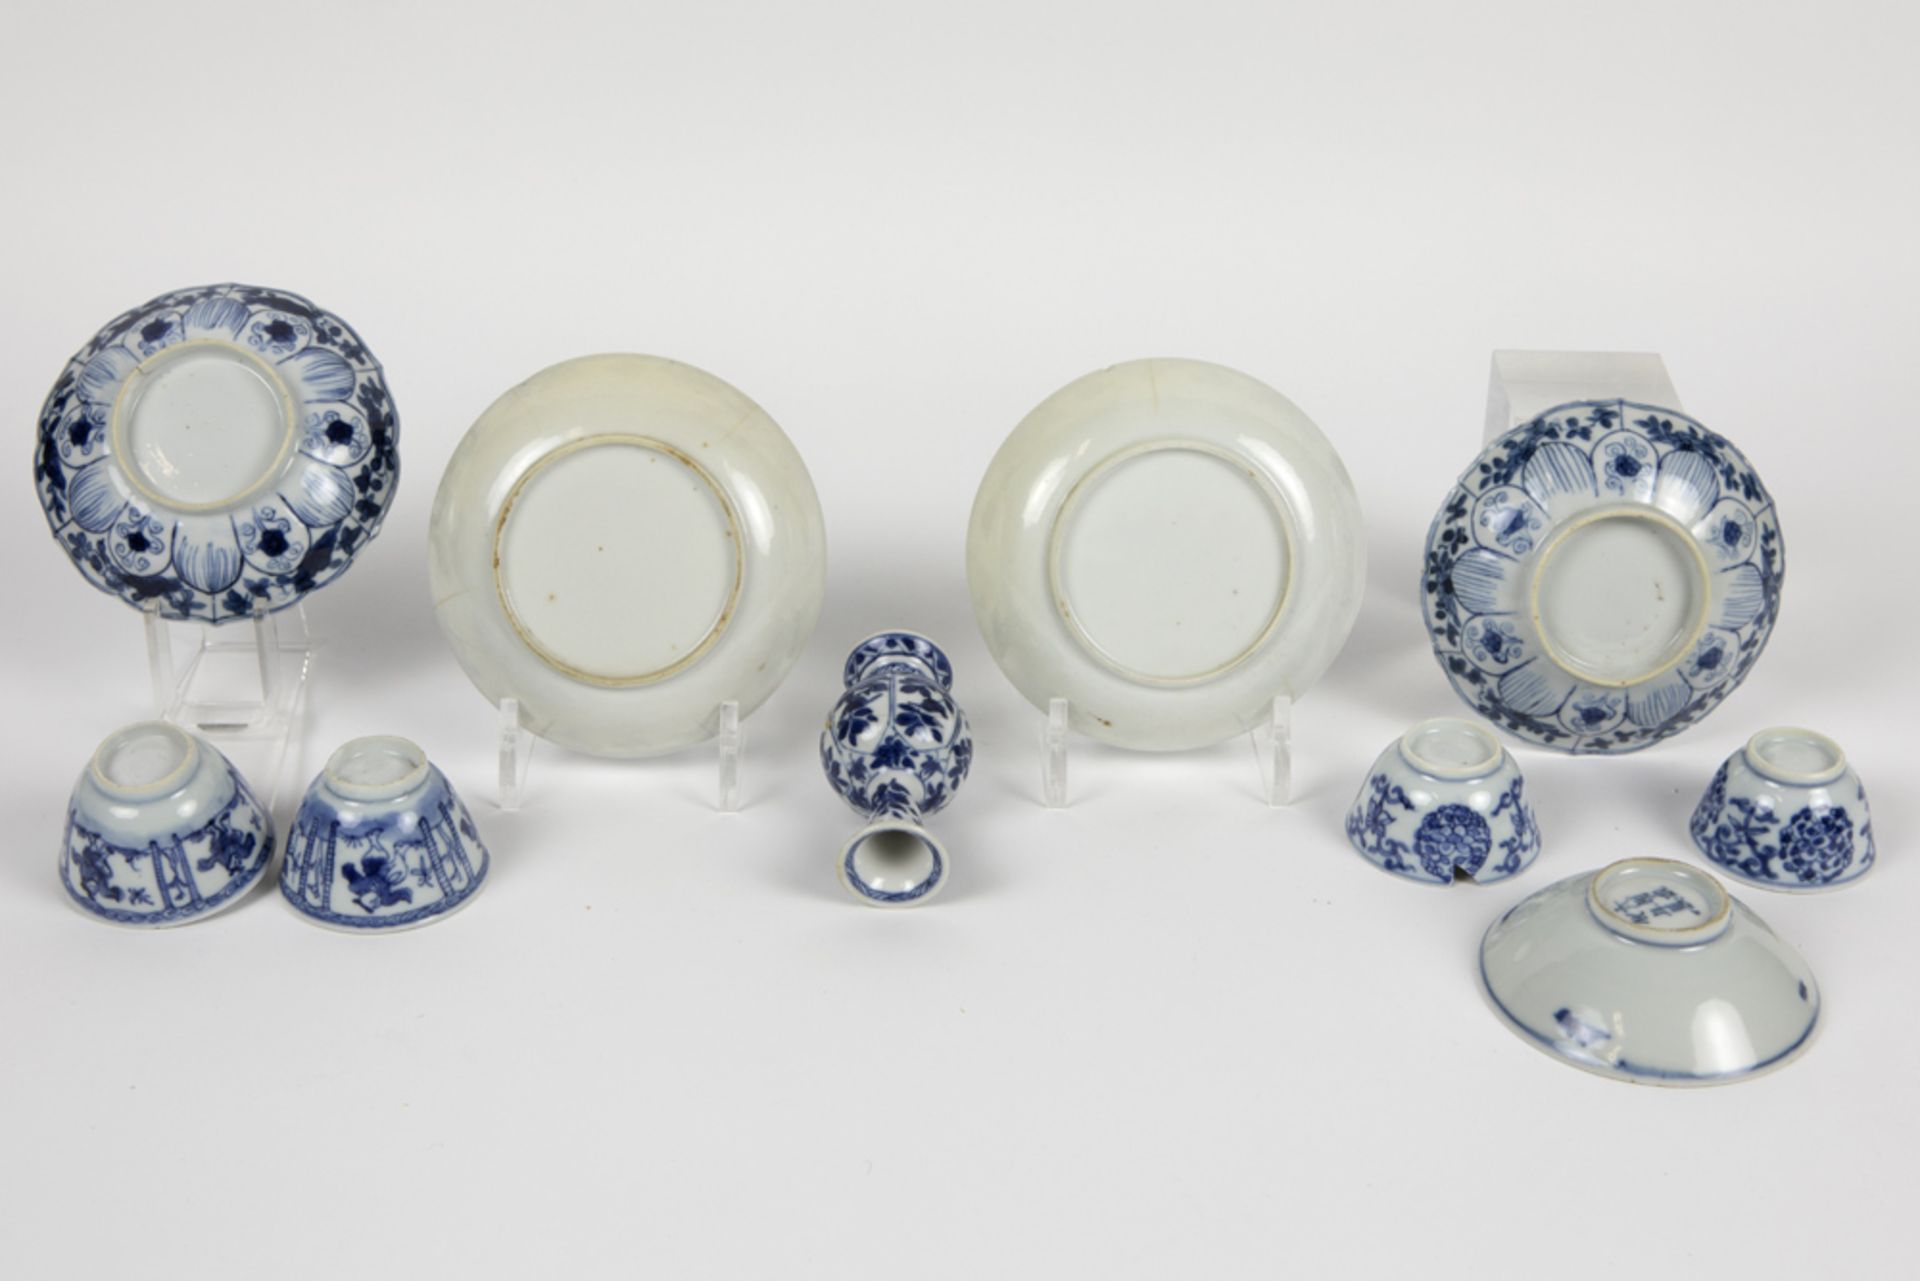 10 pieces of antique (mostly 18th Cent.) Chinese porcelain with a blue-white decor amongst which a - Image 2 of 3